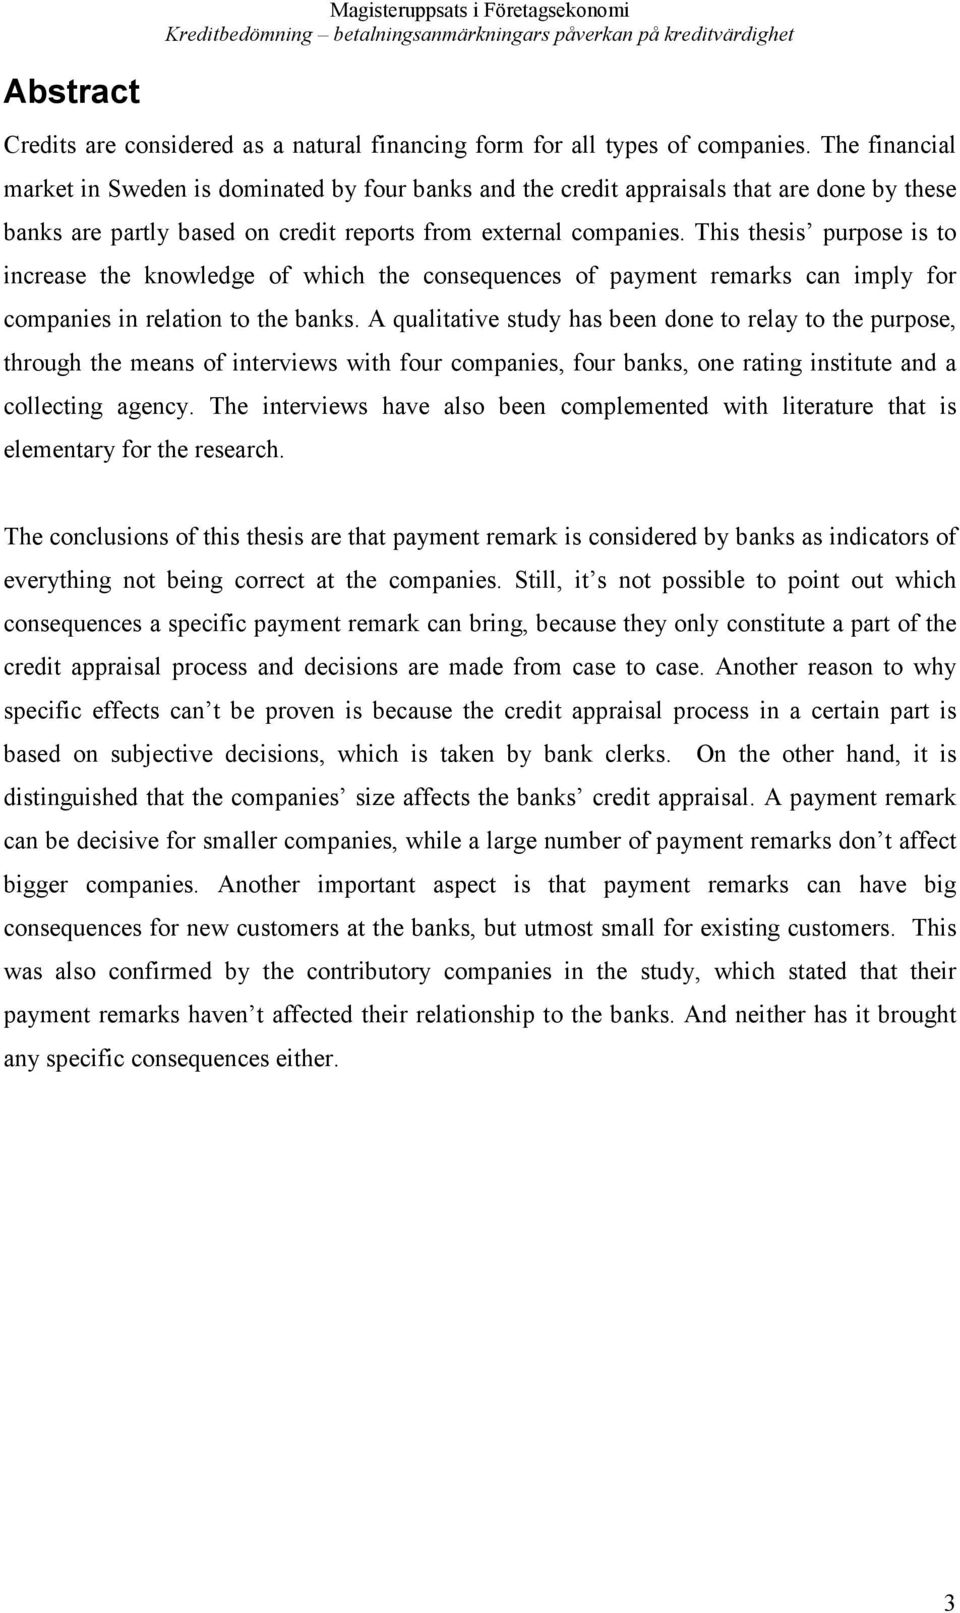 This thesis purpose is to increase the knowledge of which the consequences of payment remarks can imply for companies in relation to the banks.